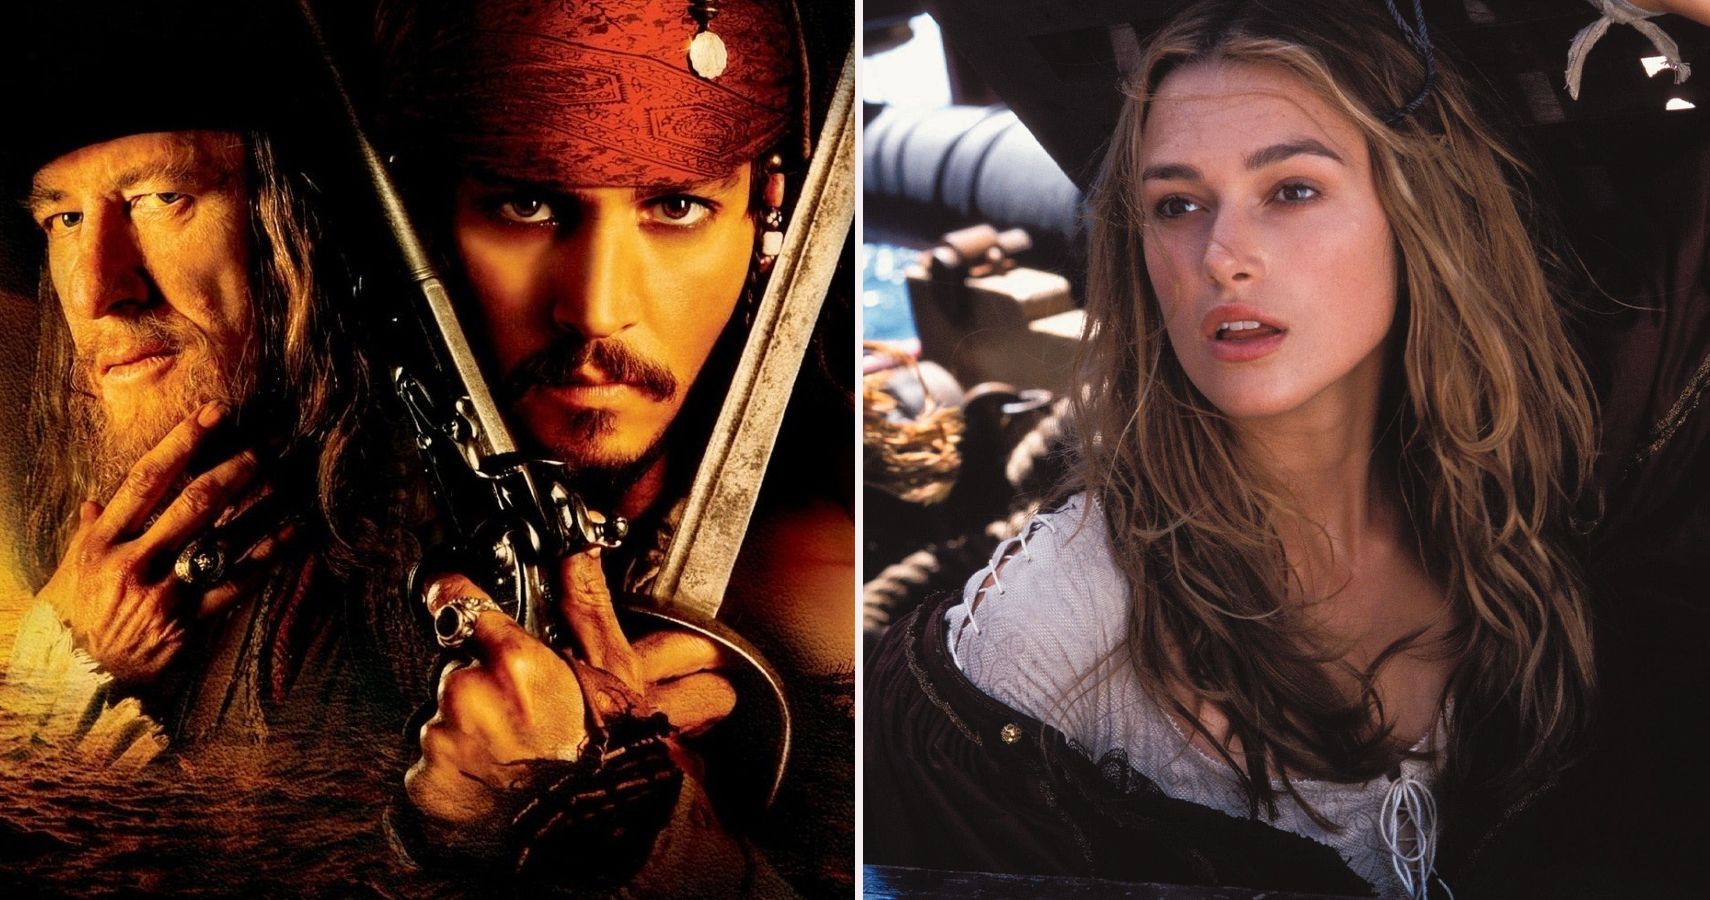 Pirates Of The Caribbean D&D Moral Alignments Of The Main Characters